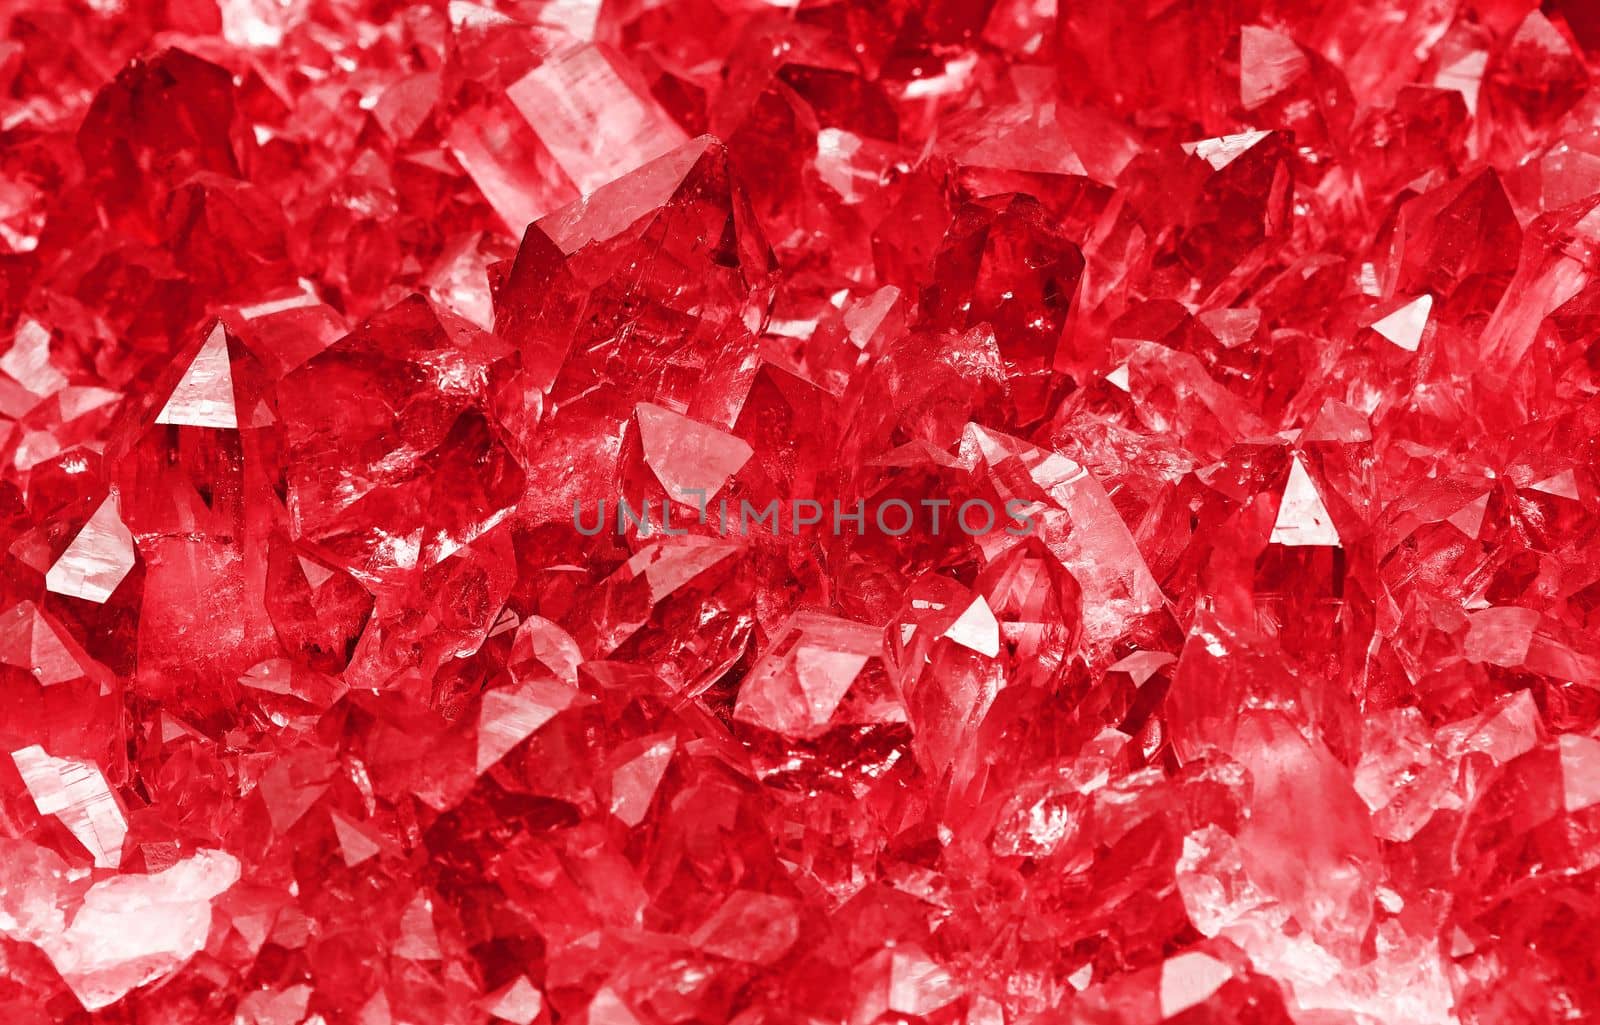 Cluster of clear transparent ruby red quartz mineral crystals (chemical composition SiO2) close up background texture, high angle view